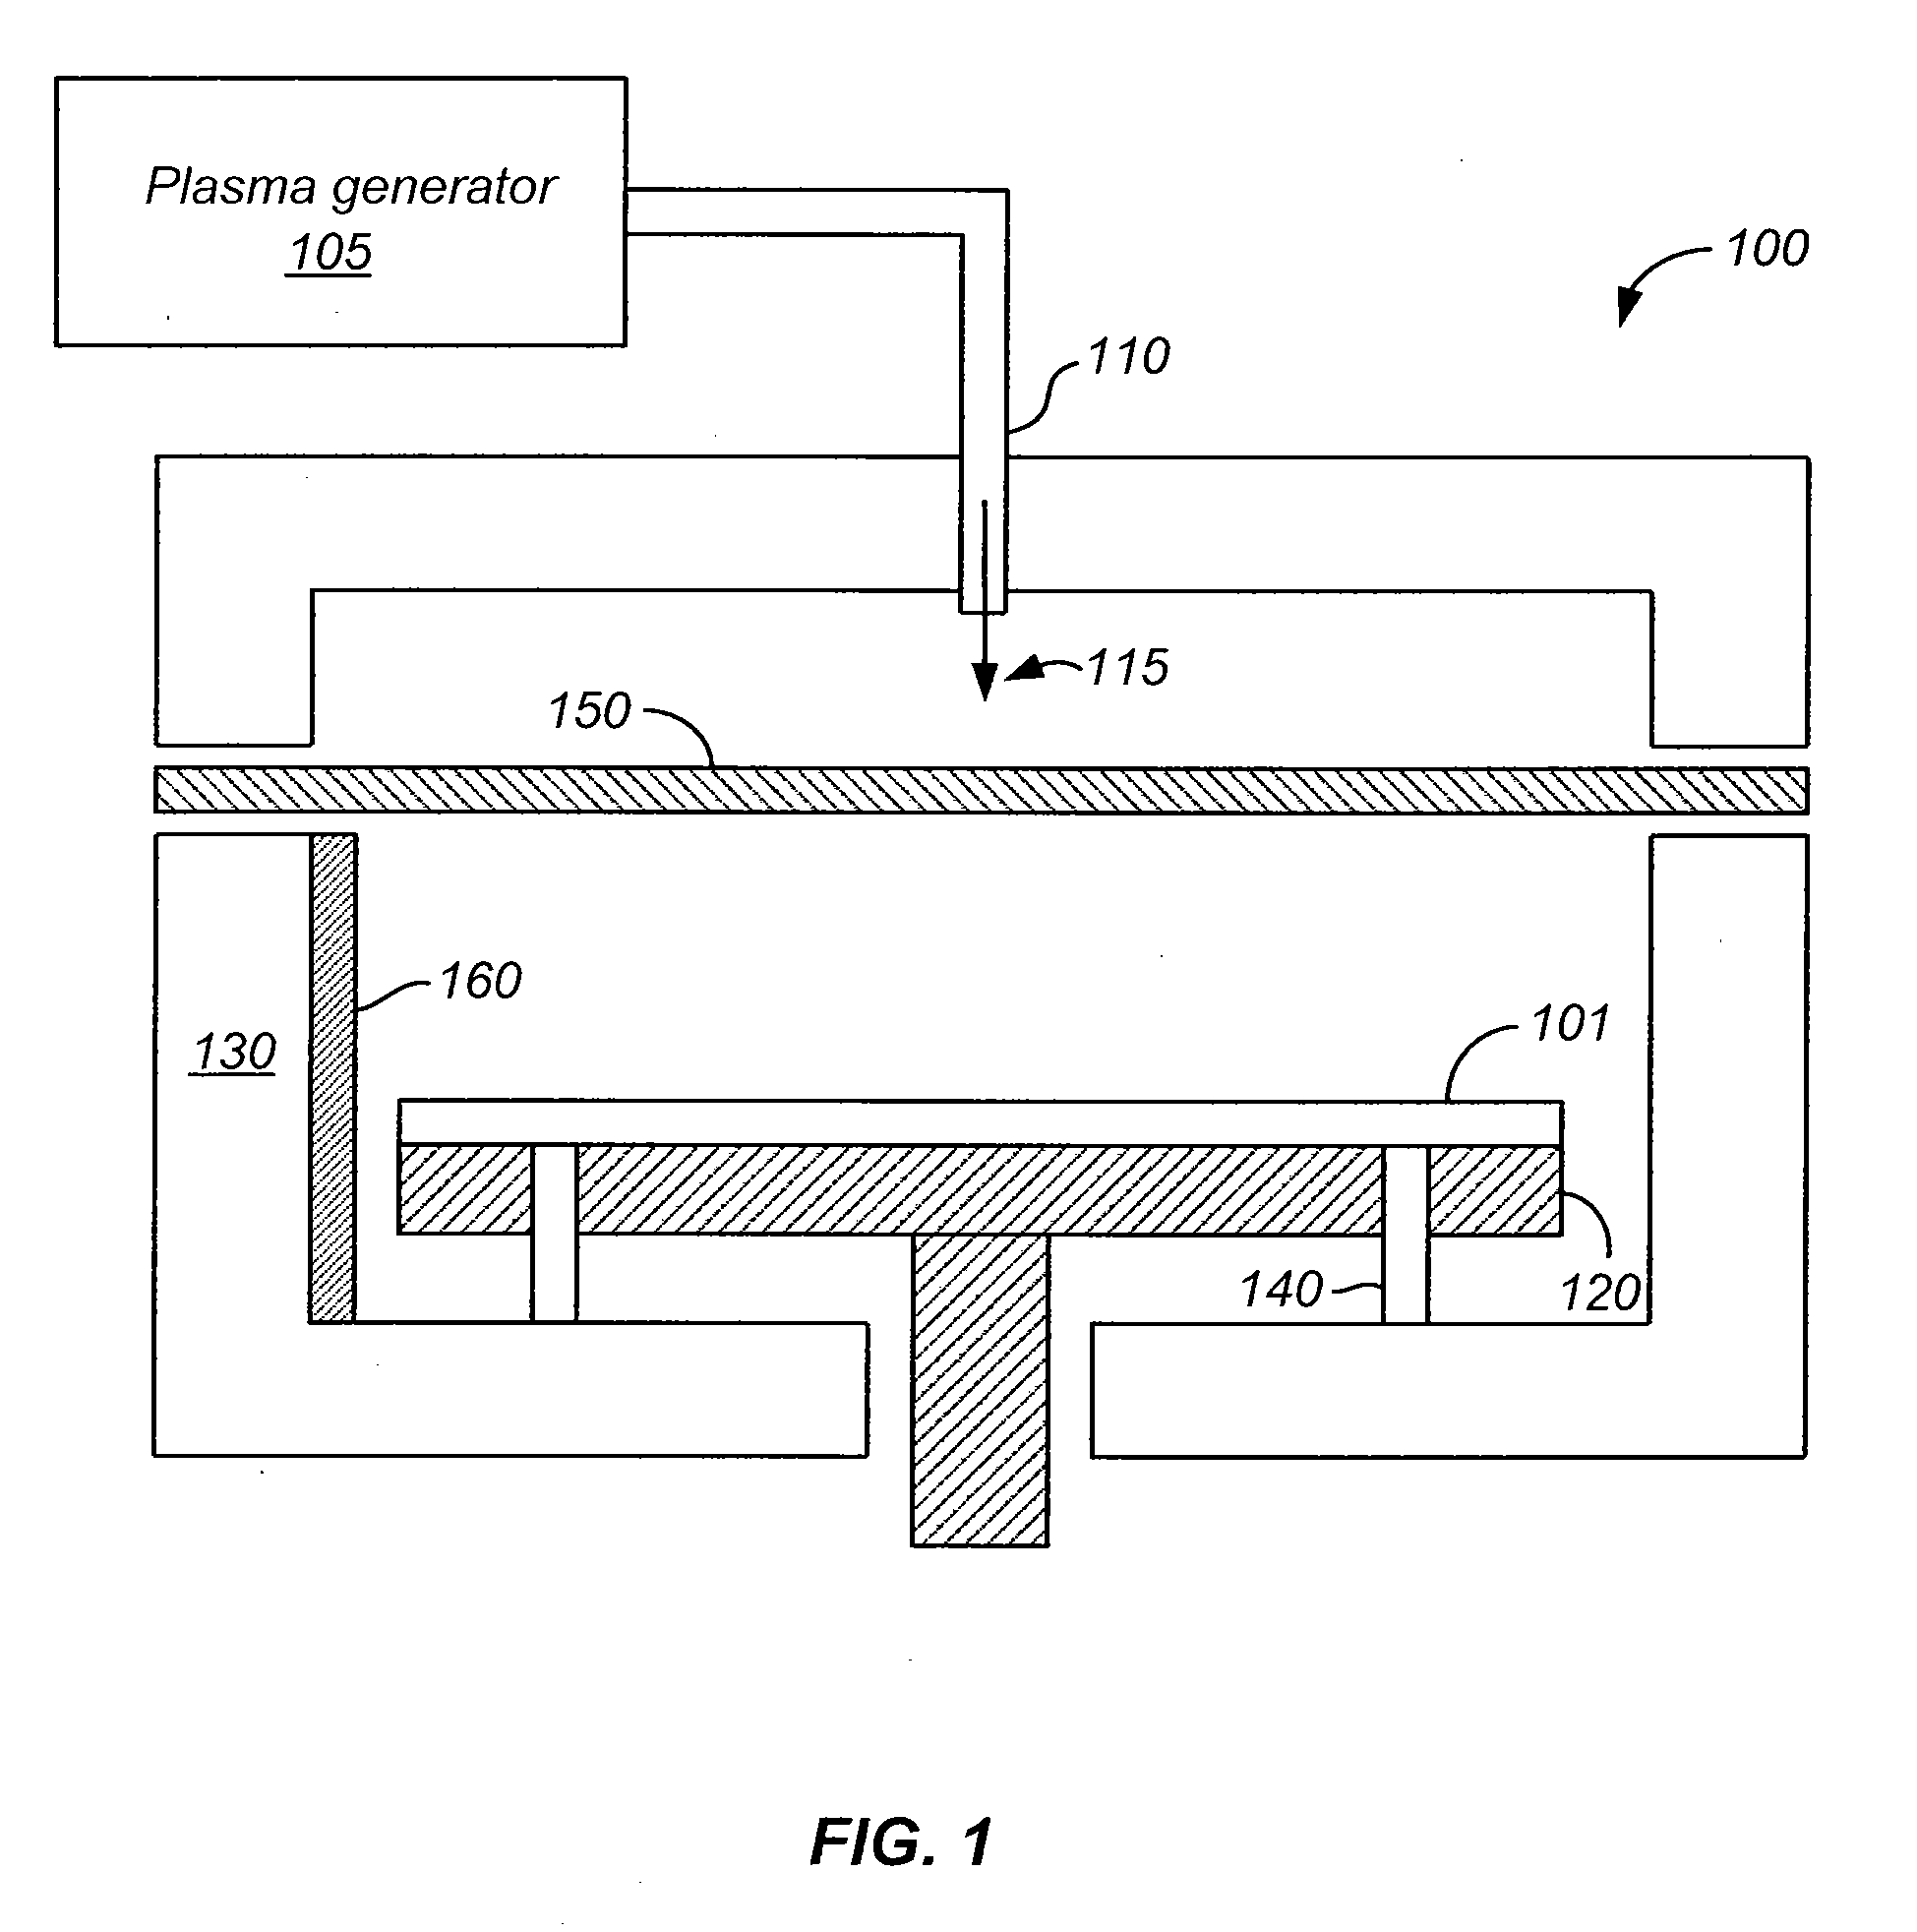 Apparatus for etching semiconductor wafers